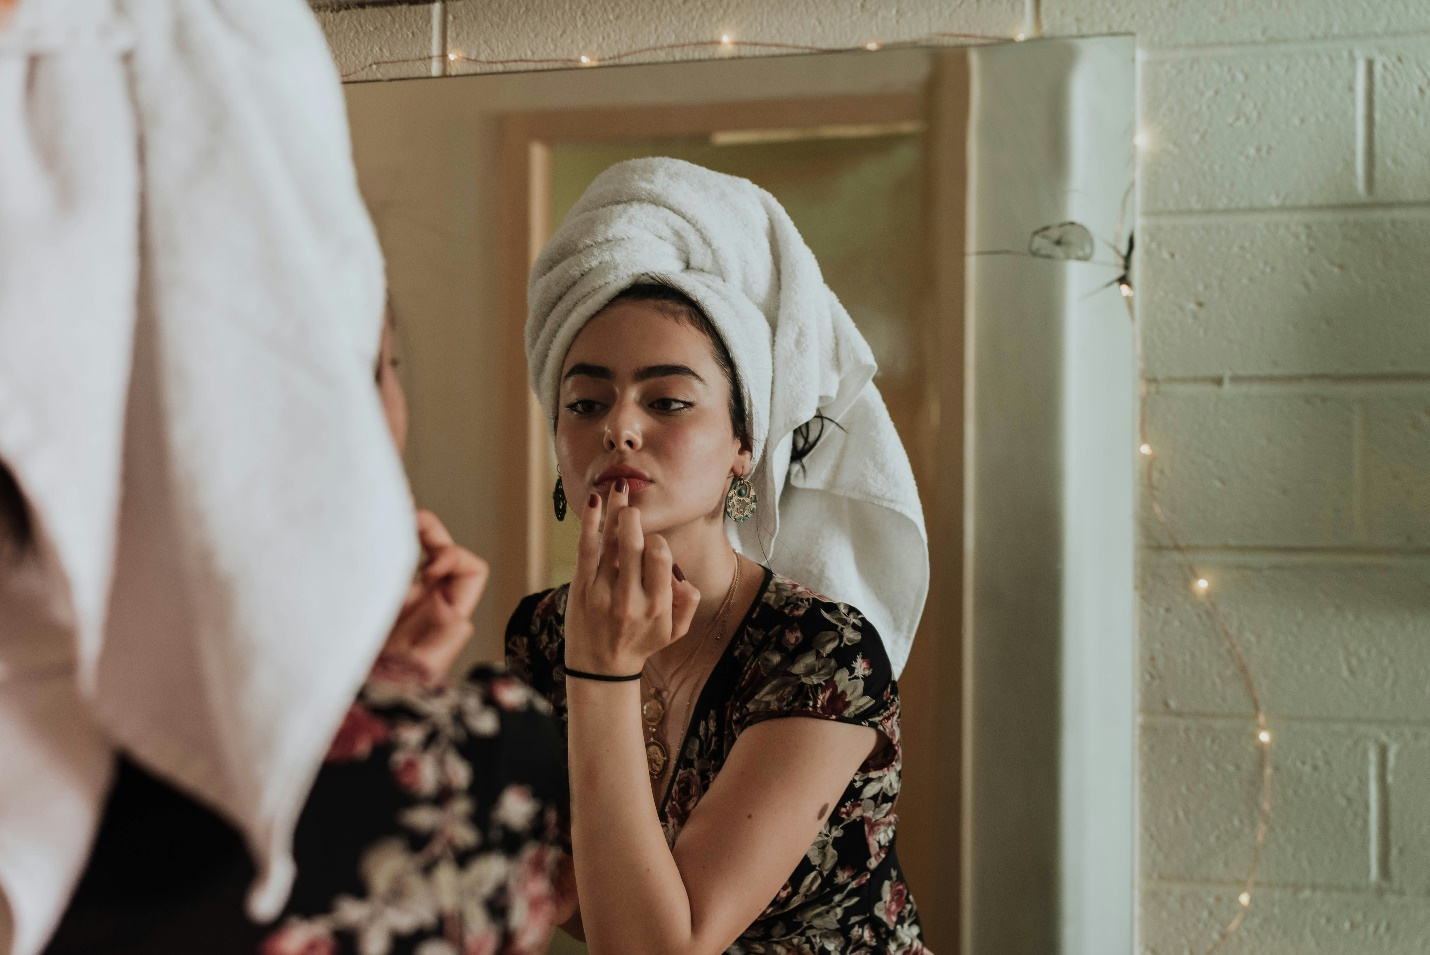 A woman wearing a black floral print top with a white towel on her head looks at her reflection in the mirror, using her ring finger to dab color onto her lips, with a white brick wall adorned with fairy lights visible around the mirror, highlighting the allure of high-quality skincare products for healthy skin.